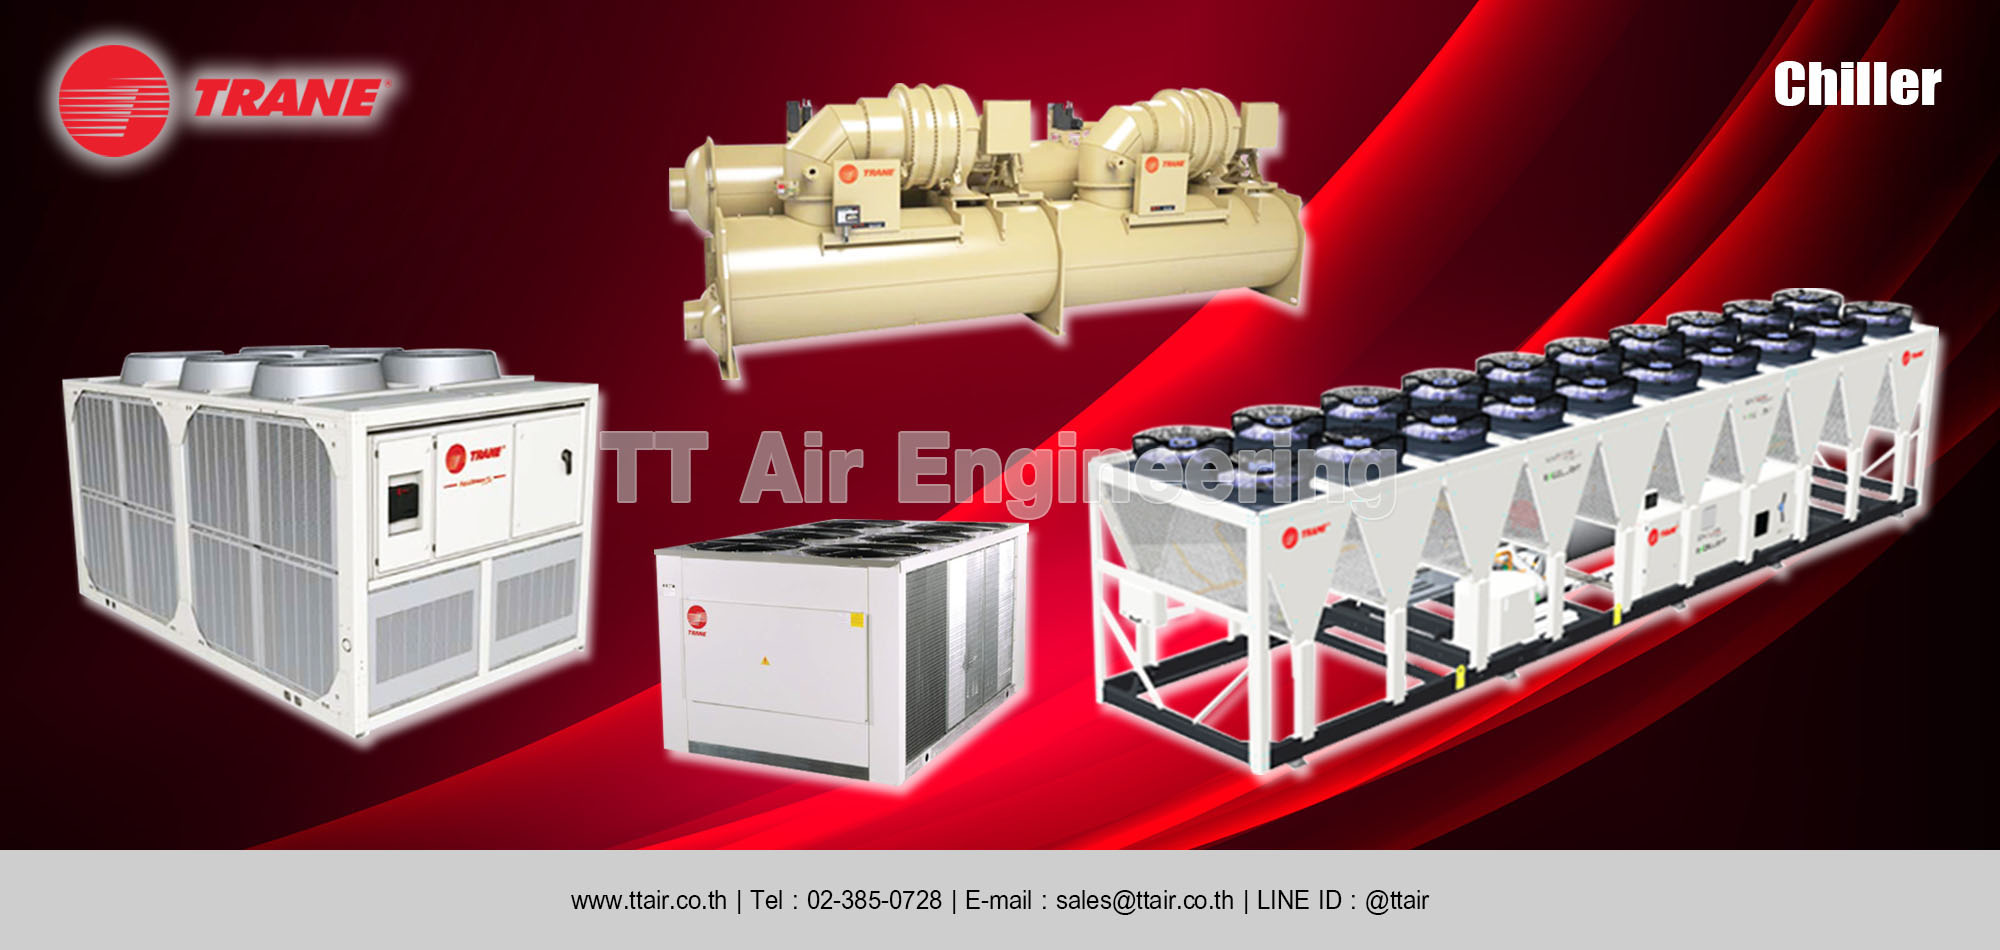 TRANE Commercial Chiller category (1)